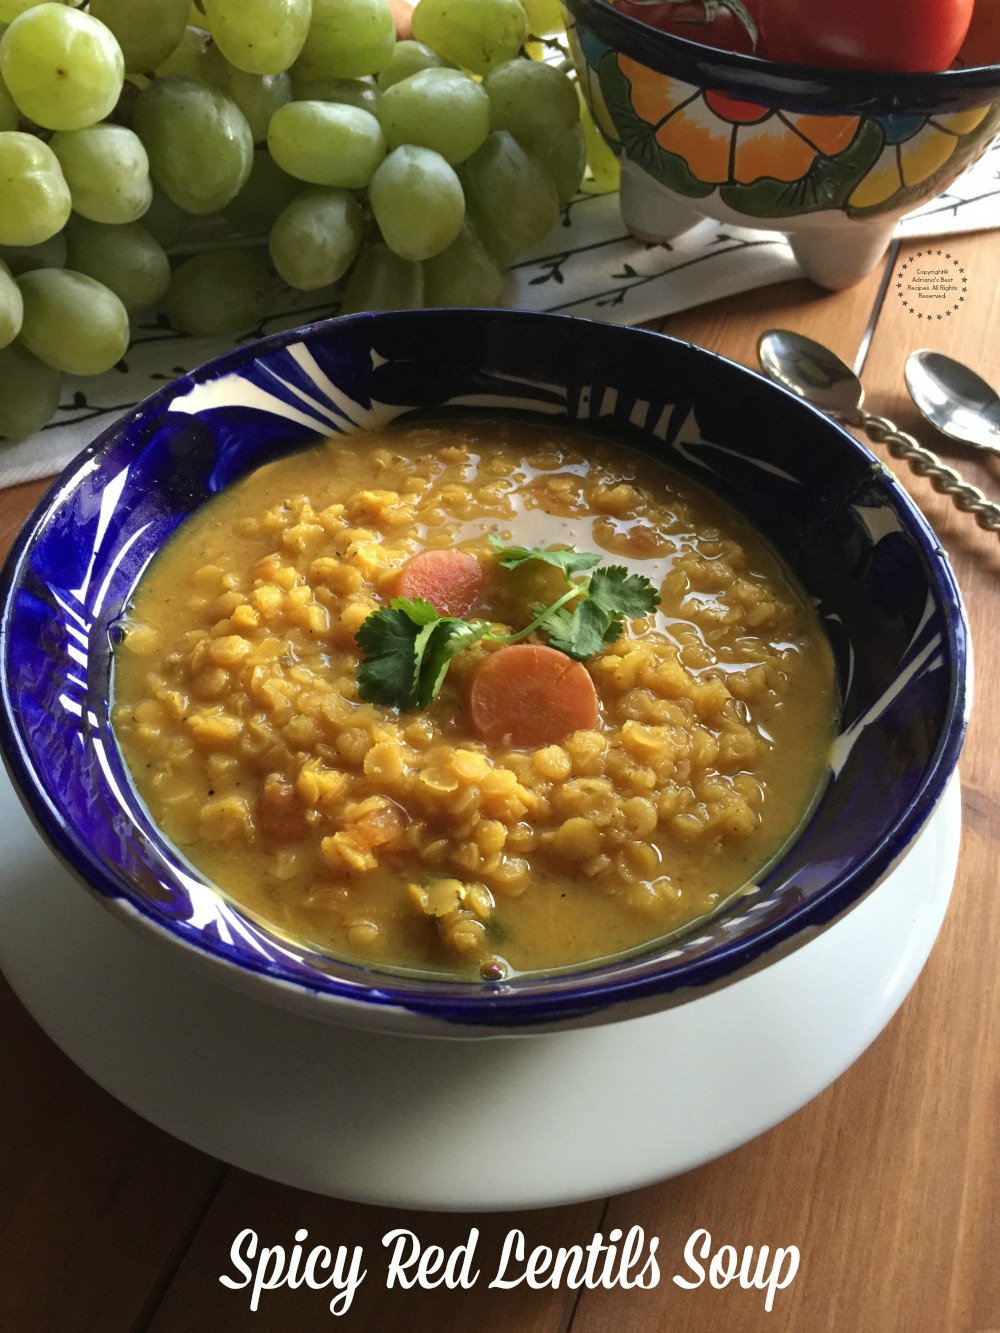 The Spicy Red Lentils Soup is made with fresh tomatoes, La Morena Whole Jalapeños garlic cumin ginger turmeric vegetable stock and Knorr Tomato with Chicken Granulated Bouillon